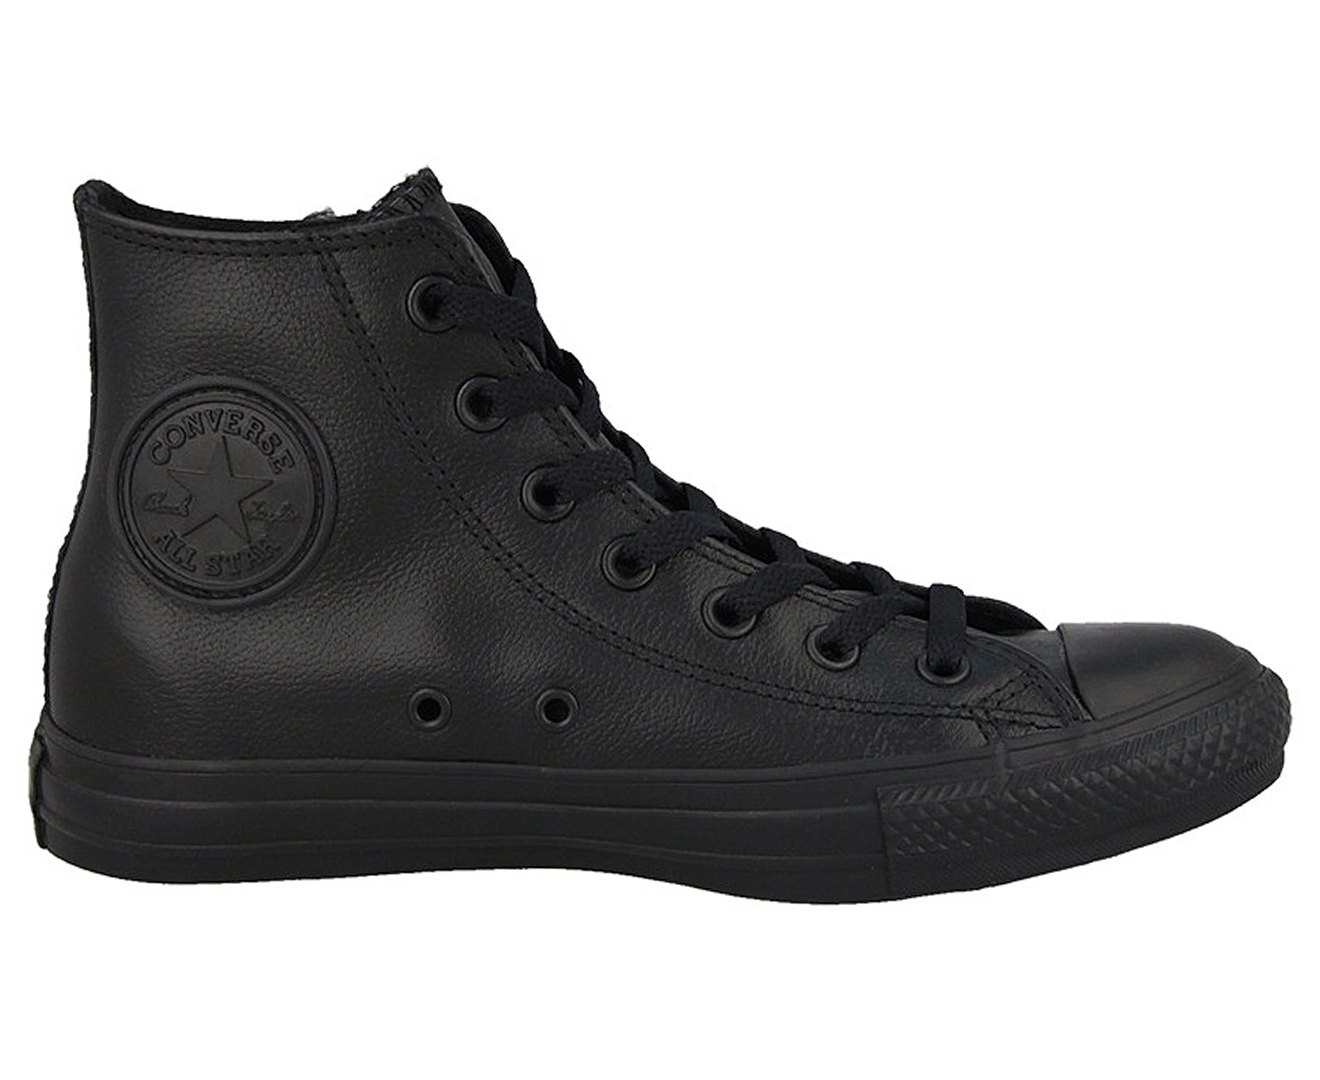 Converse Unisex Chuck Taylor All Star High Top Leather Sneakers ...